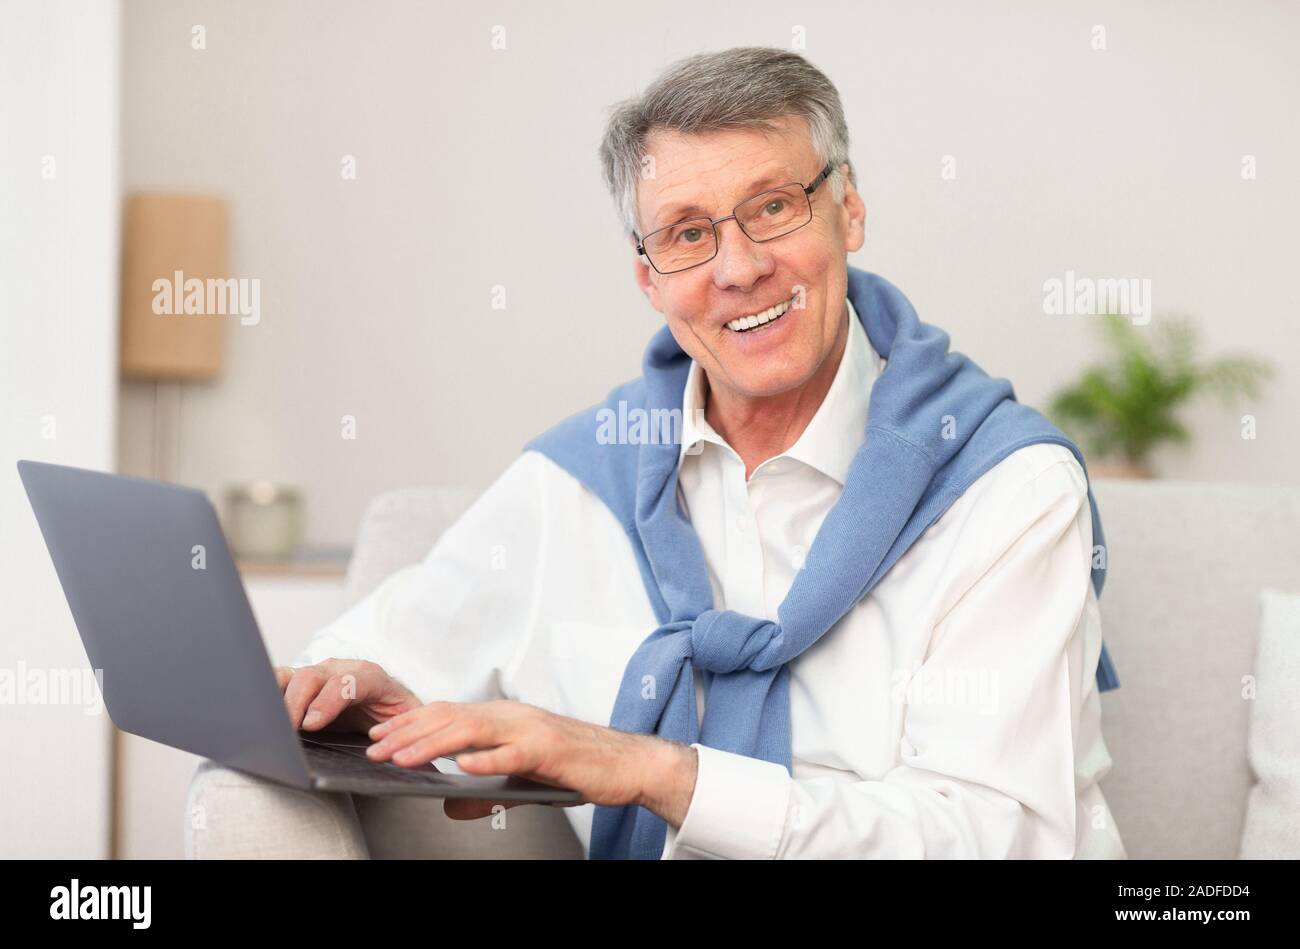 Man working on Laptop Sitting on Sofa At Home Banque D'Images